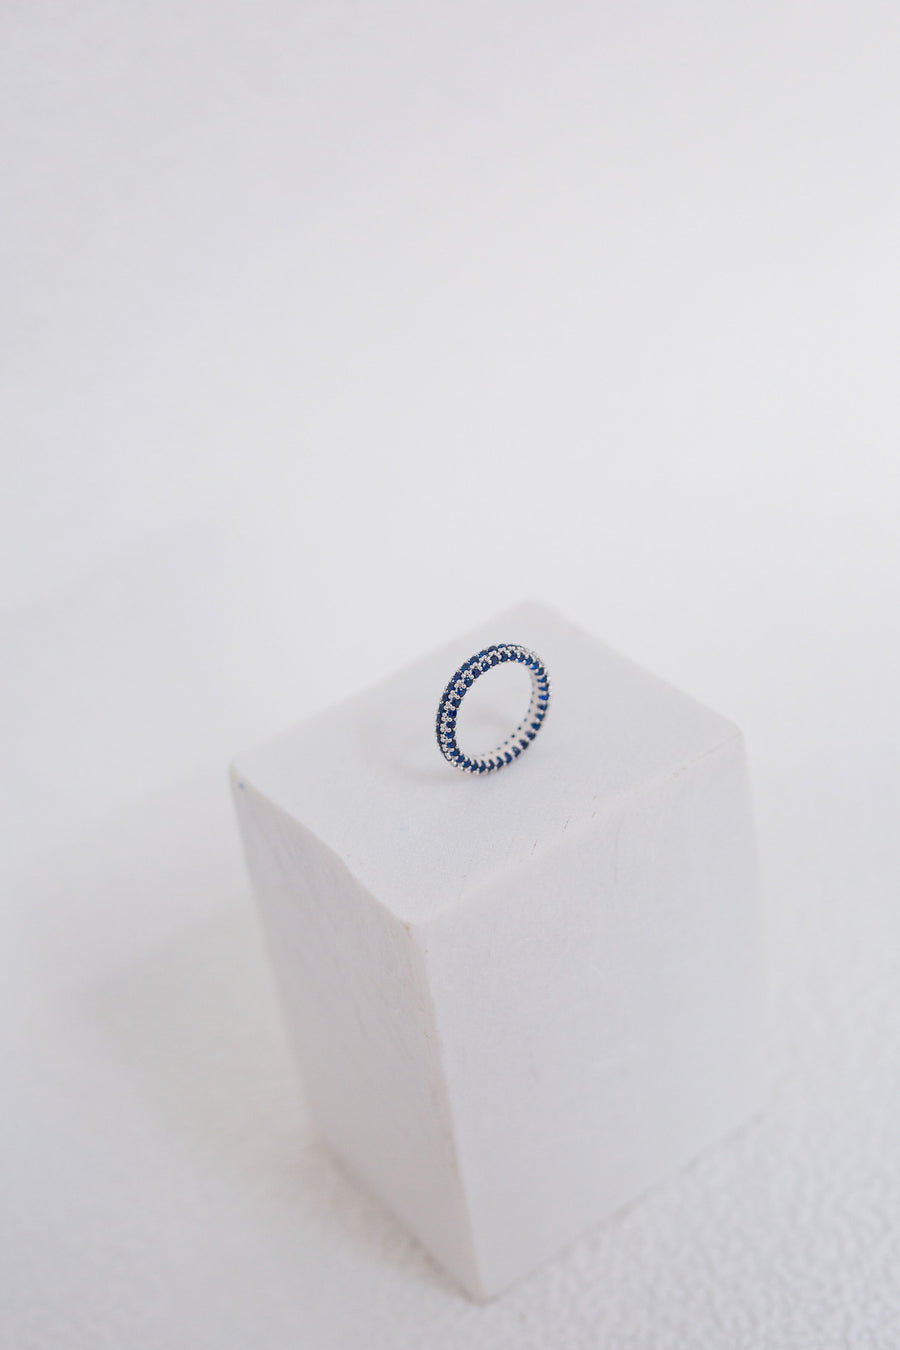 3.00 CT Blue Simulated Sapphire Rhodium Plated Eternity Band